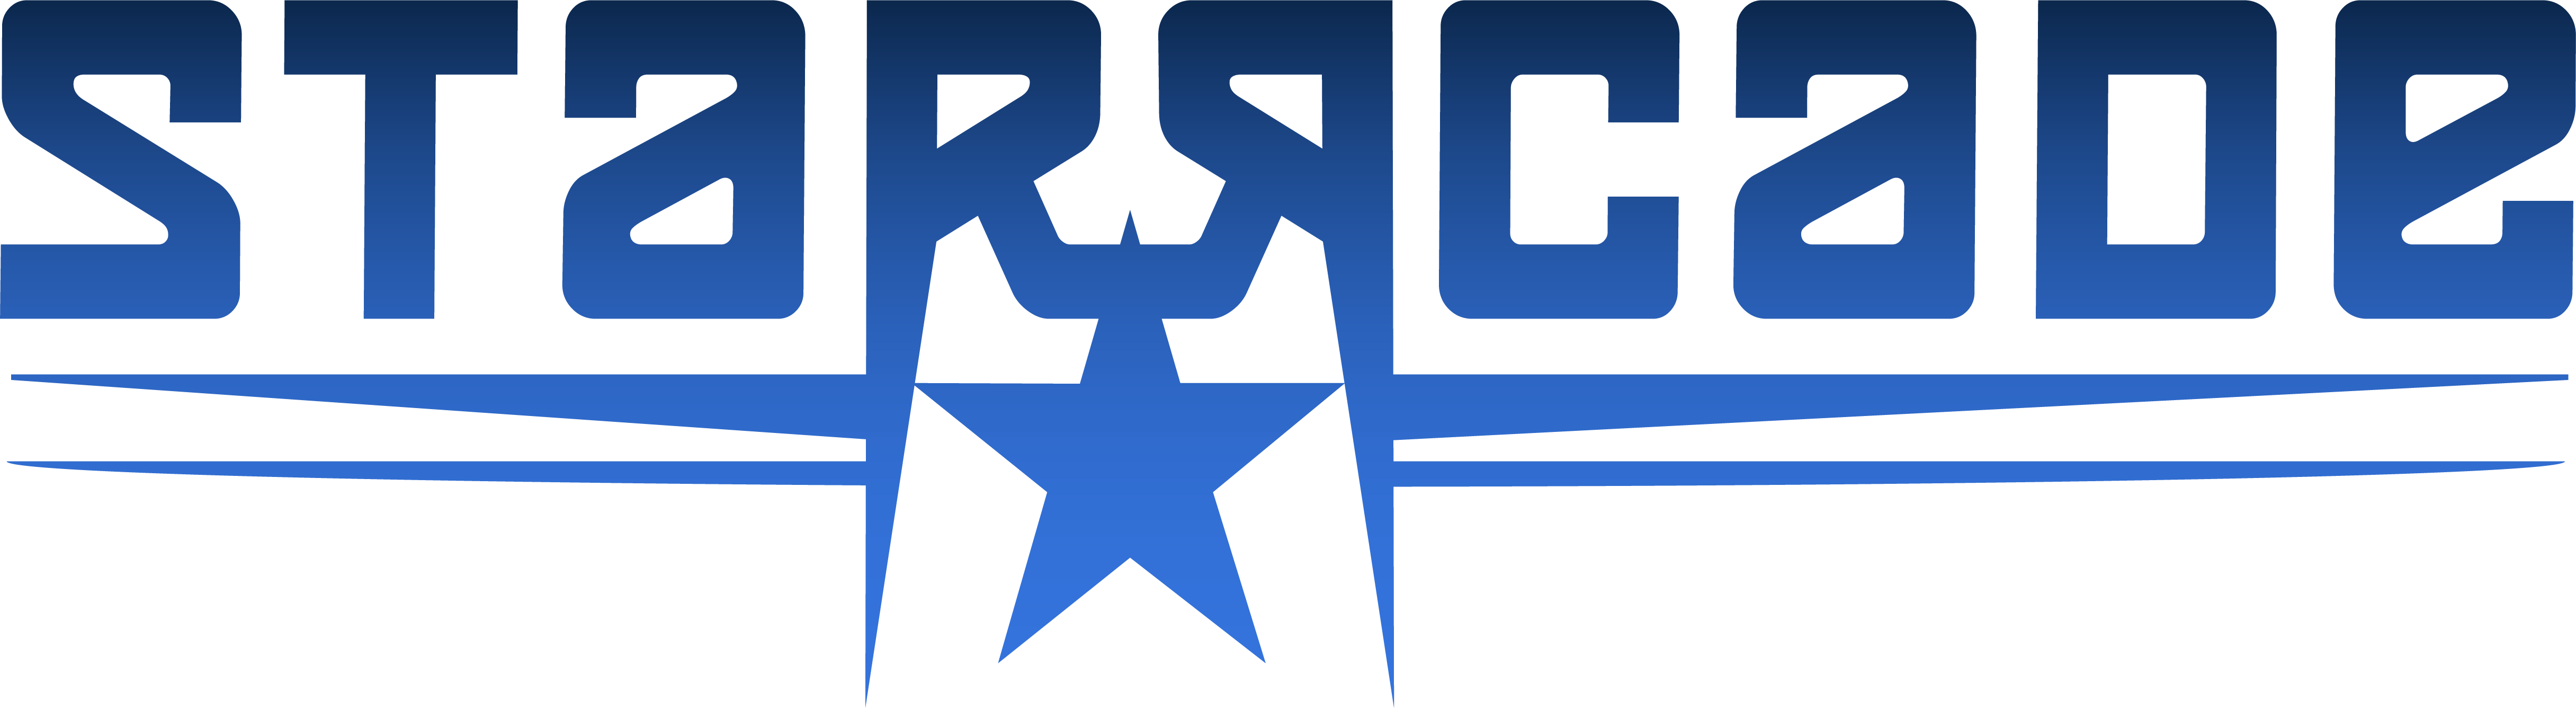 wcw_starrcade_2000_by_b1uechr1s-d6828m3.png